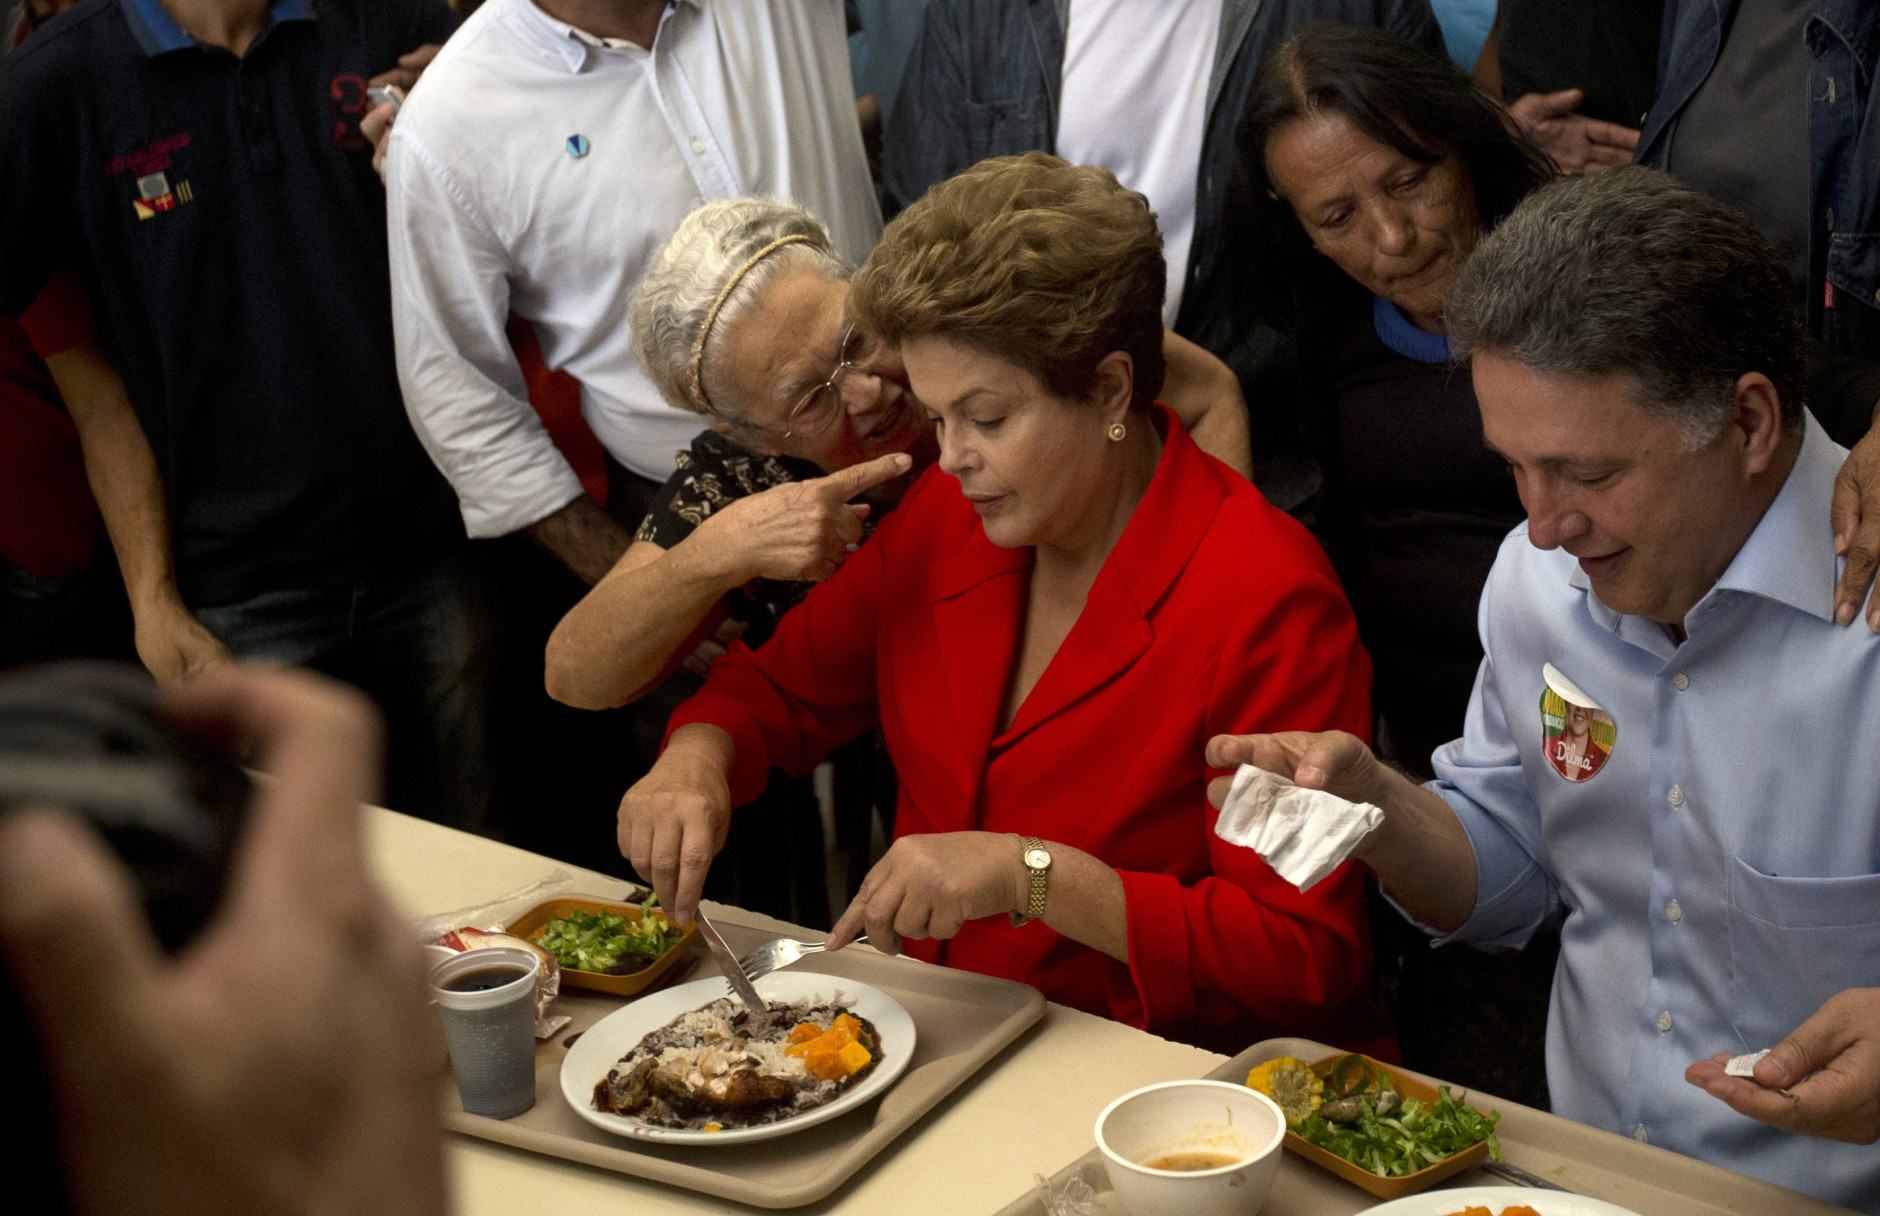 FOR USE AS DESIRED, YEAR END PHOTOS - FILE - A woman talks to Brazil's President Dilma Rousseff, who is running for reelection for the Workers Party (PT), as Rousseff makes a campaign stop at a popular restaurant in Rio de Janeiro, Brazil, Wednesday, Aug. 27, 2014.  (AP Photo/Silvia Izquierdo, File)